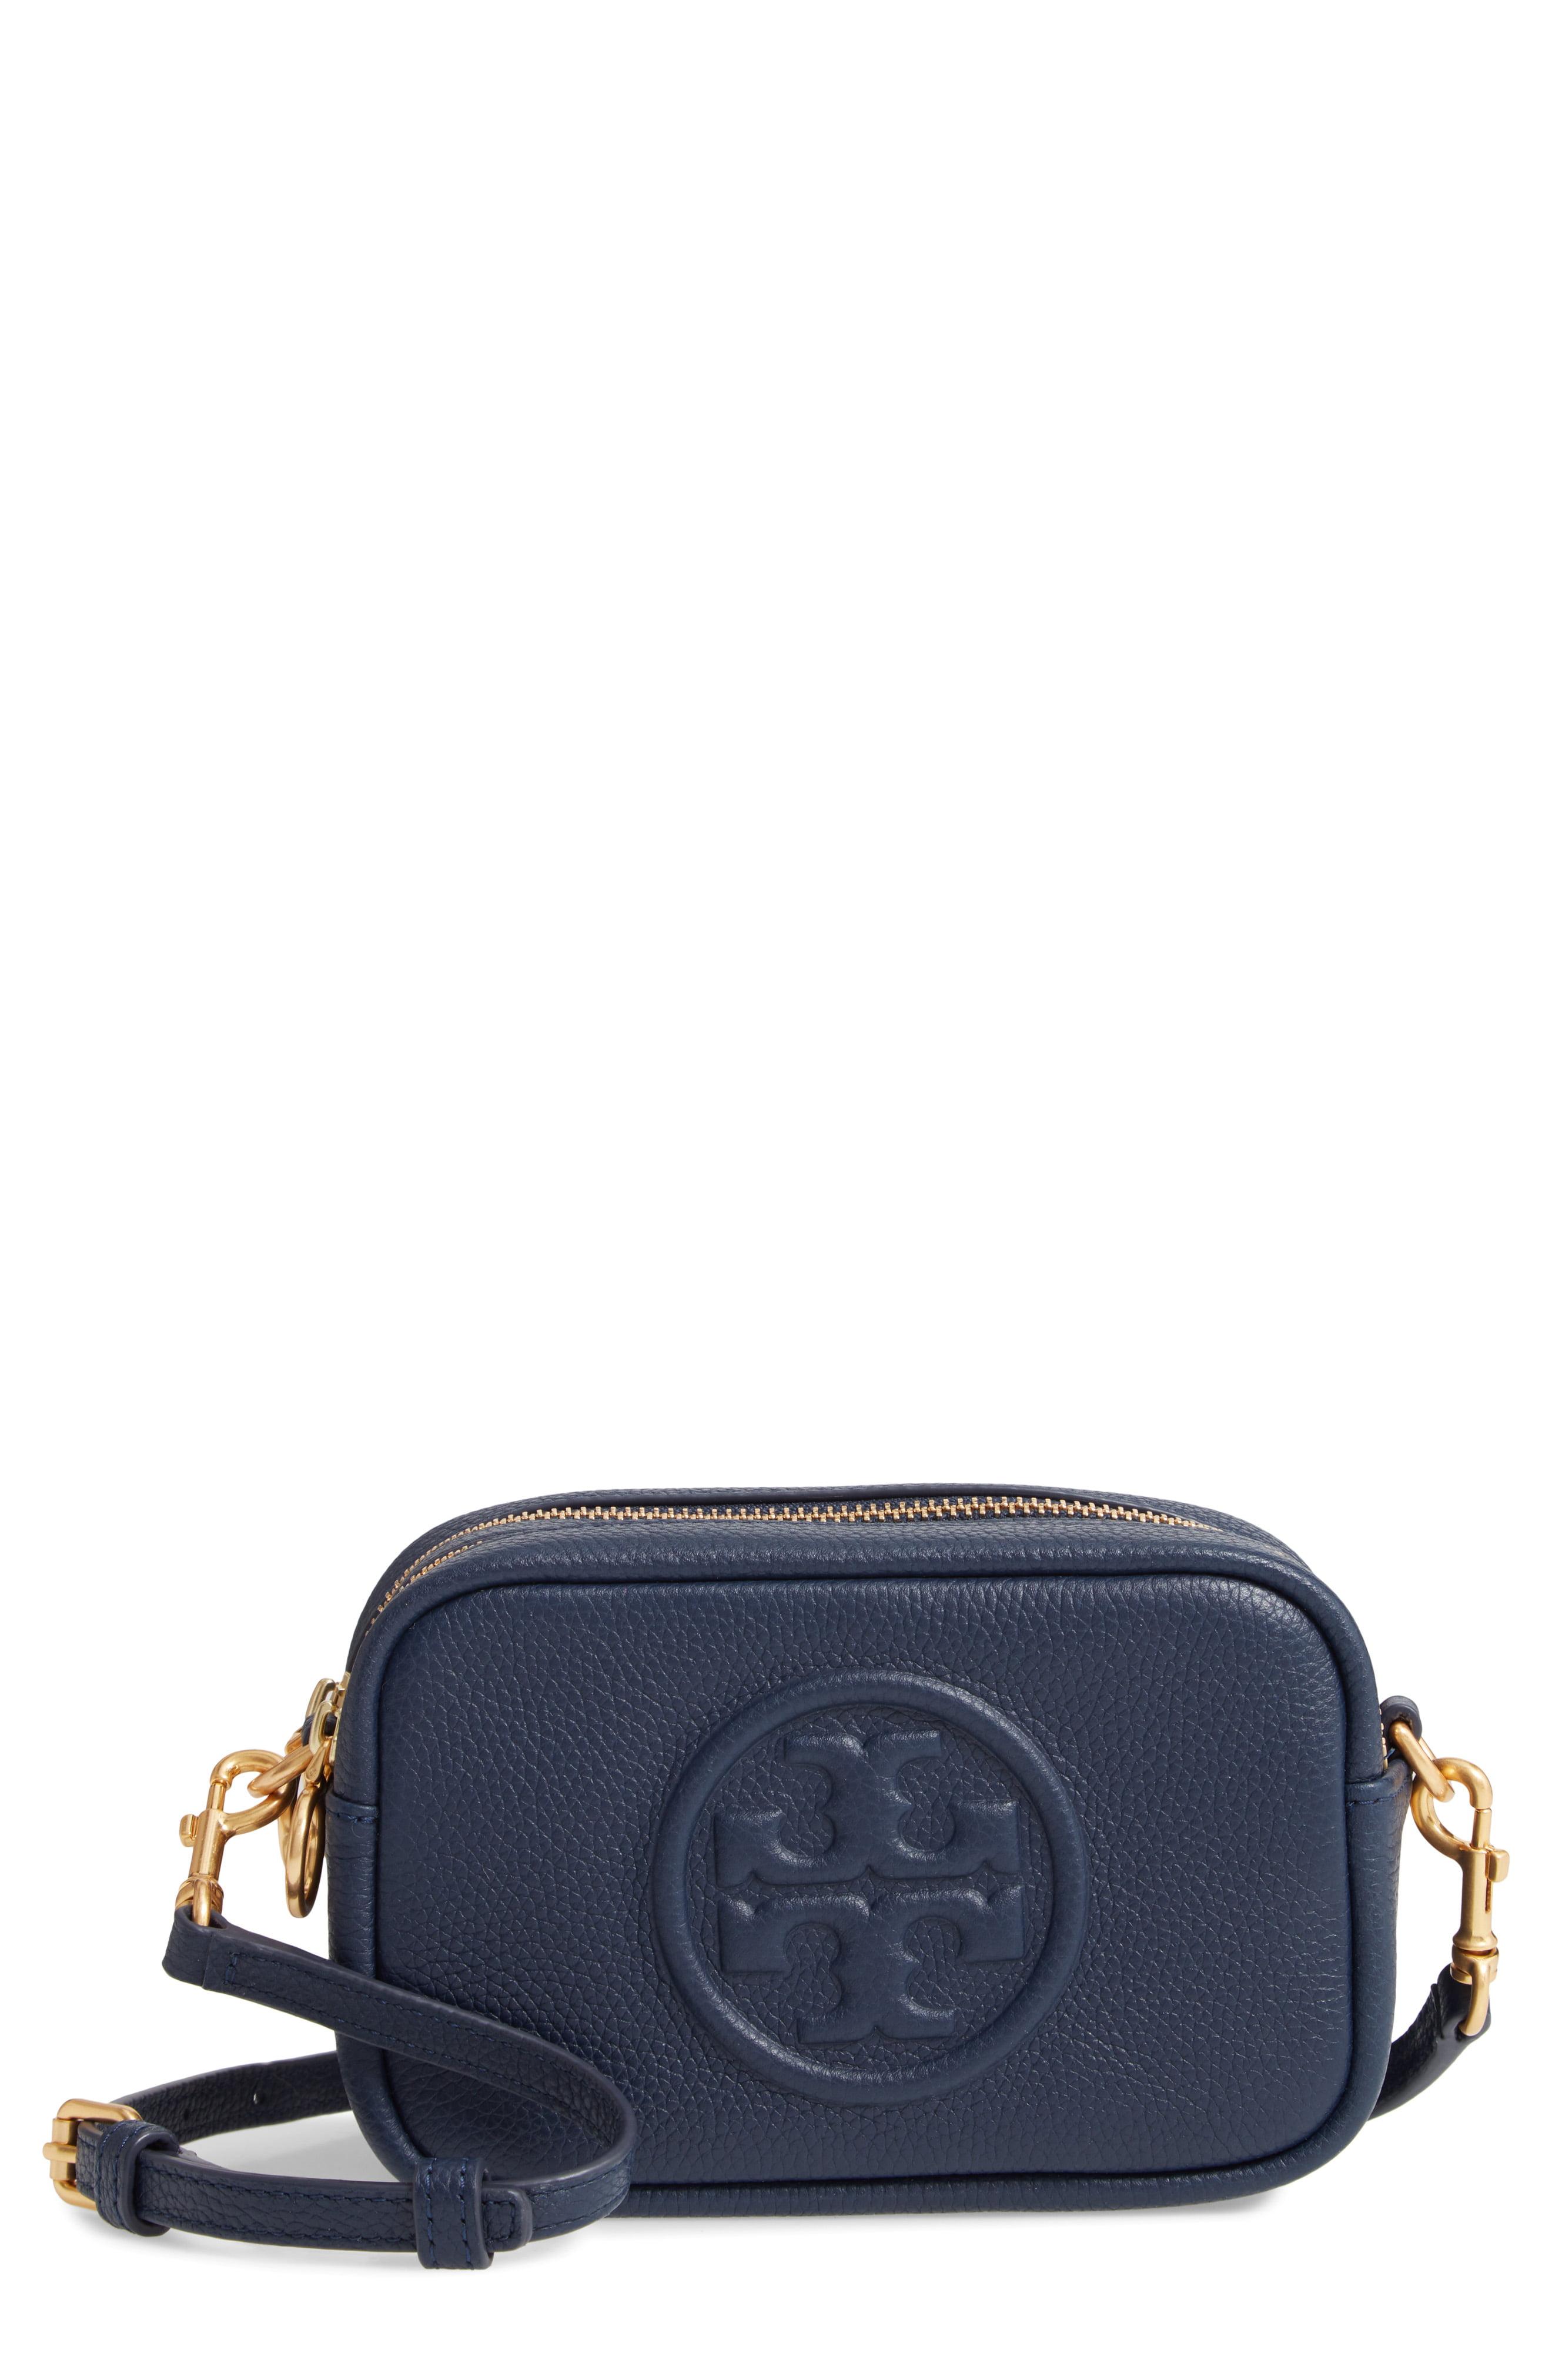 Tory Burch Perry Bomb Leather Crossbody Bag in Blue - Lyst